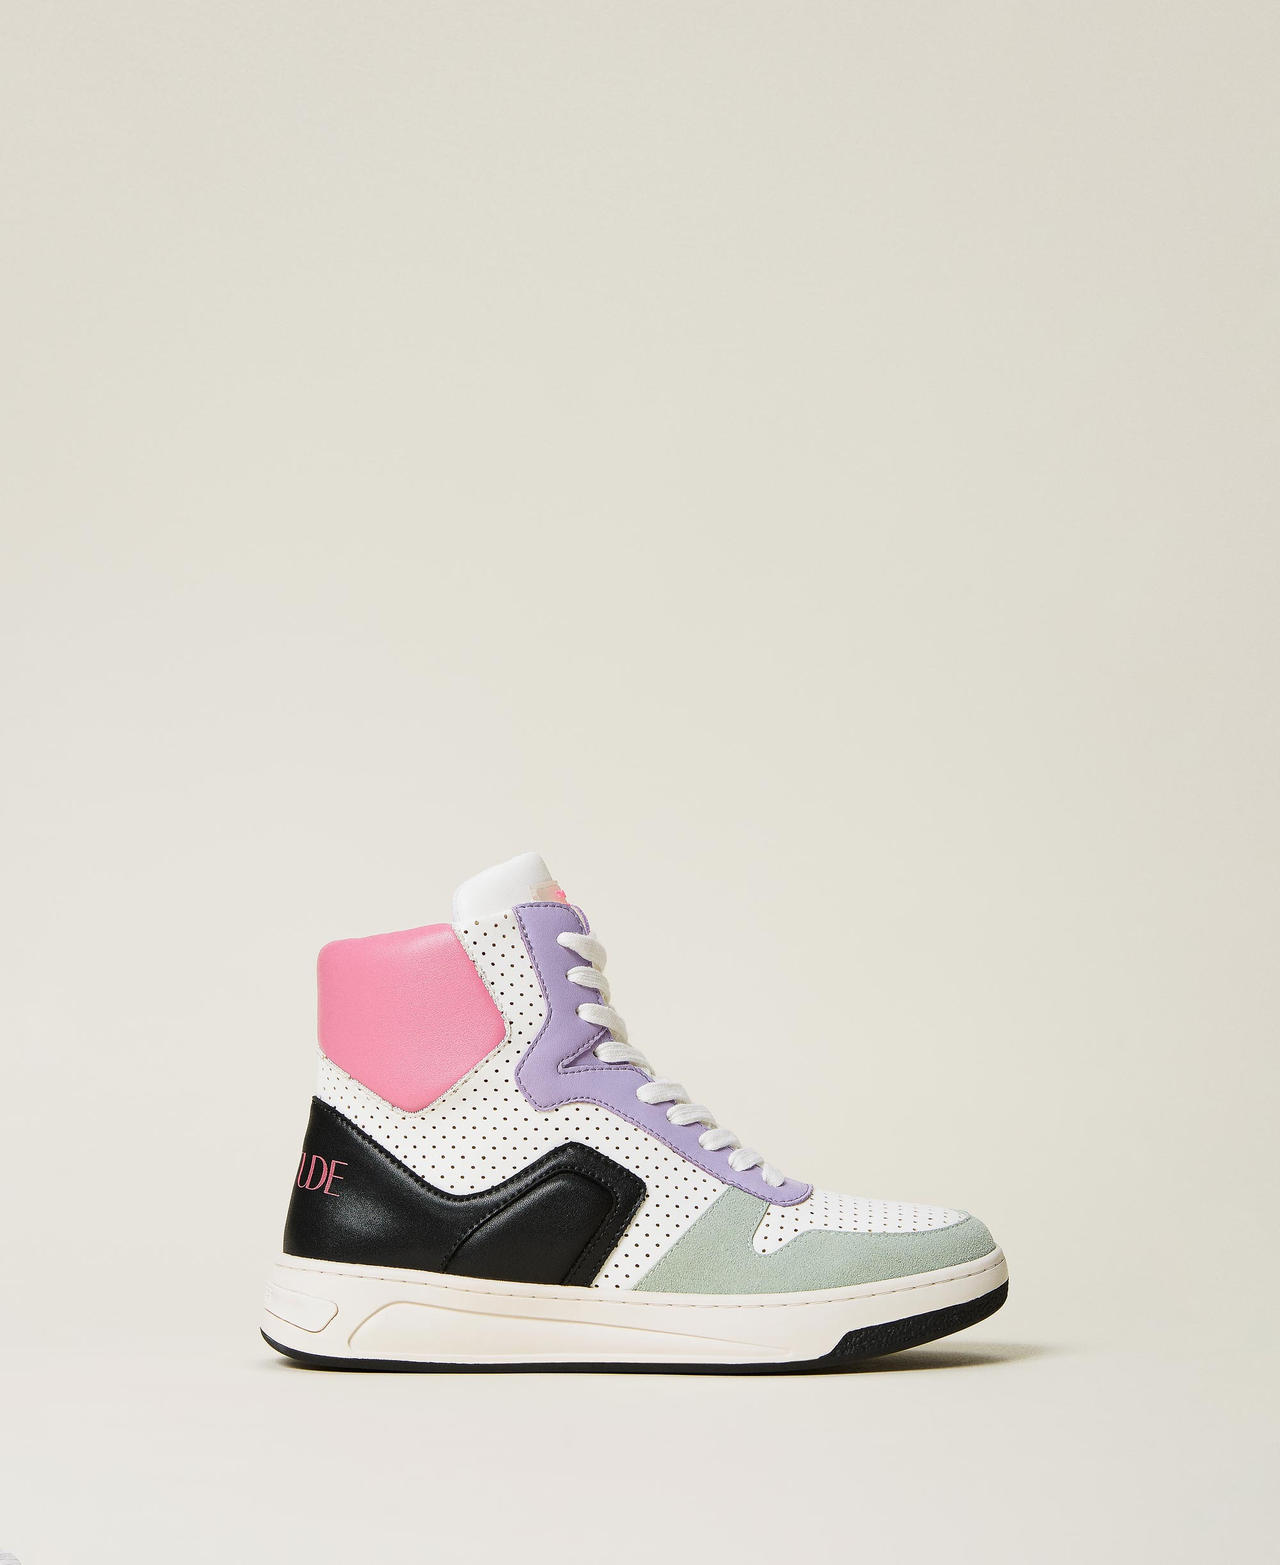 High top colour block trainers Off White / "Misty Jade" Green / "Hot Pink" / Black Multicolour Woman 221ACT074-03